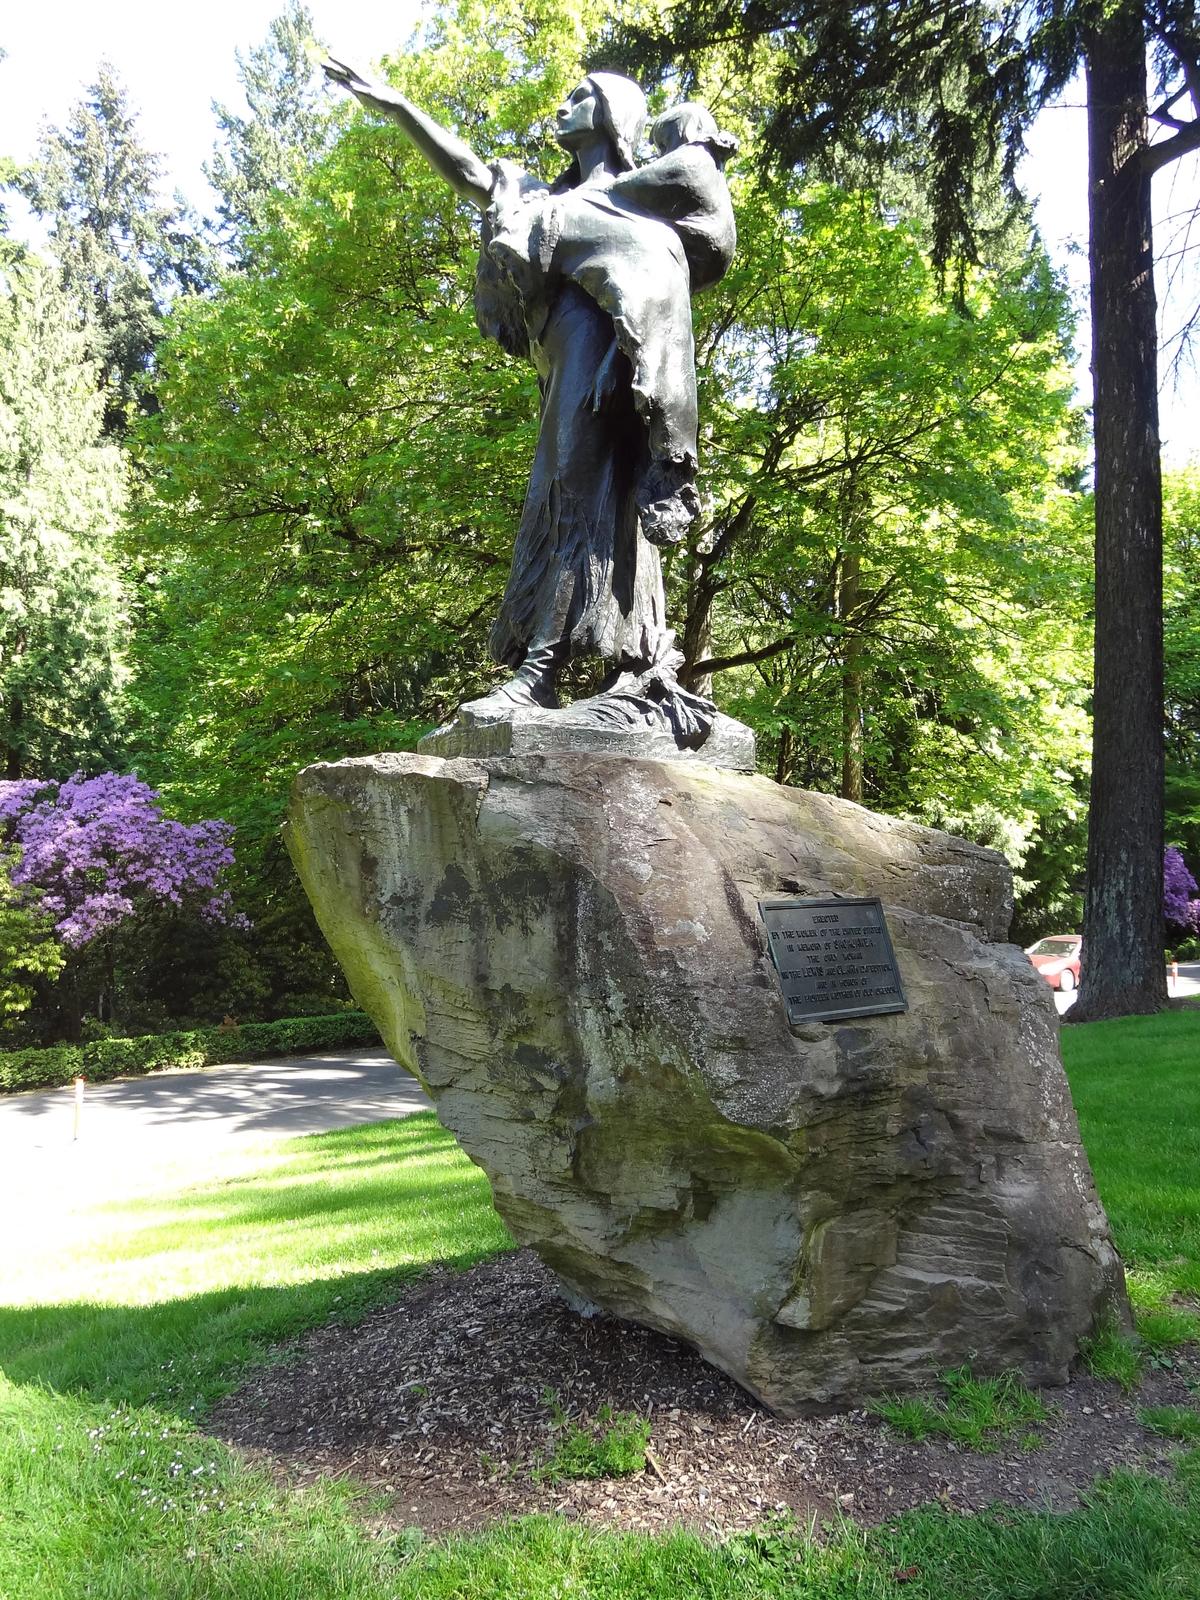 The Sacajawea and Jean-Baptiste sculpture in Washington Park, Portland was funded by women, sculpted by a woman artist, and conceived to promote women’s suffrage. And yet the monument to the Lemhi Shoshone guide tells a conveniently limited version of her story Photo: Simon Cobb